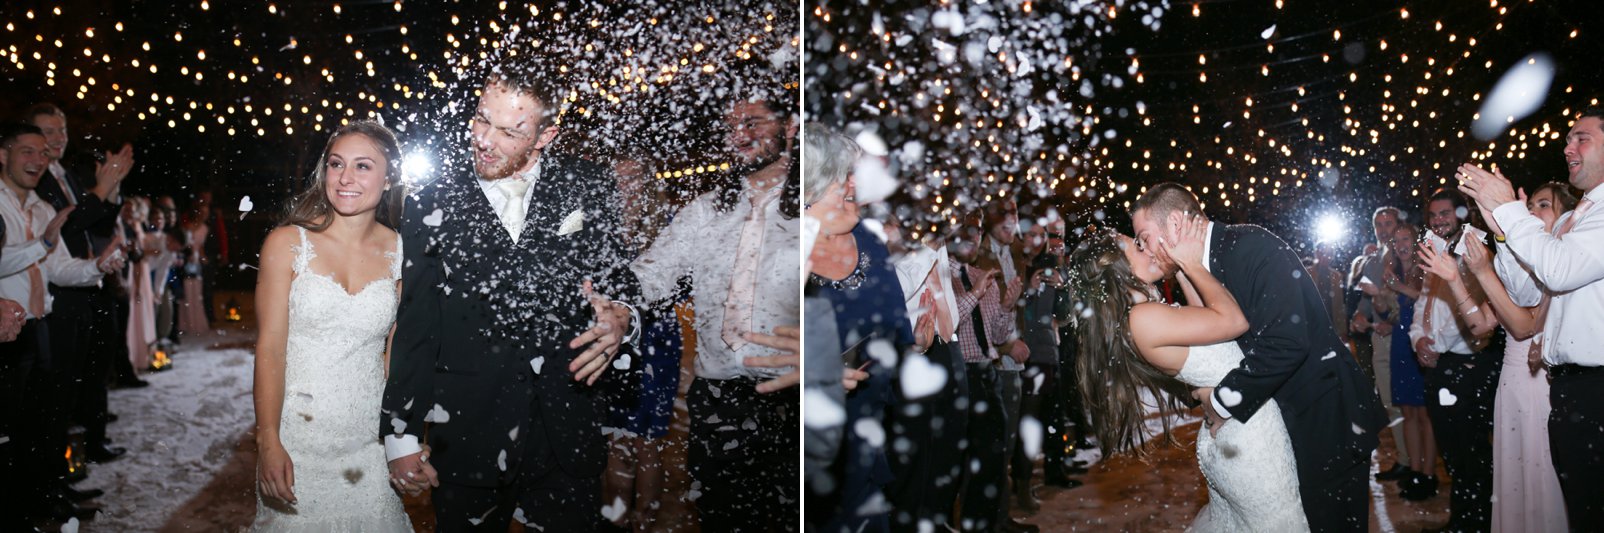 grand exit during colorado winter wedding at spruce mountain ranch